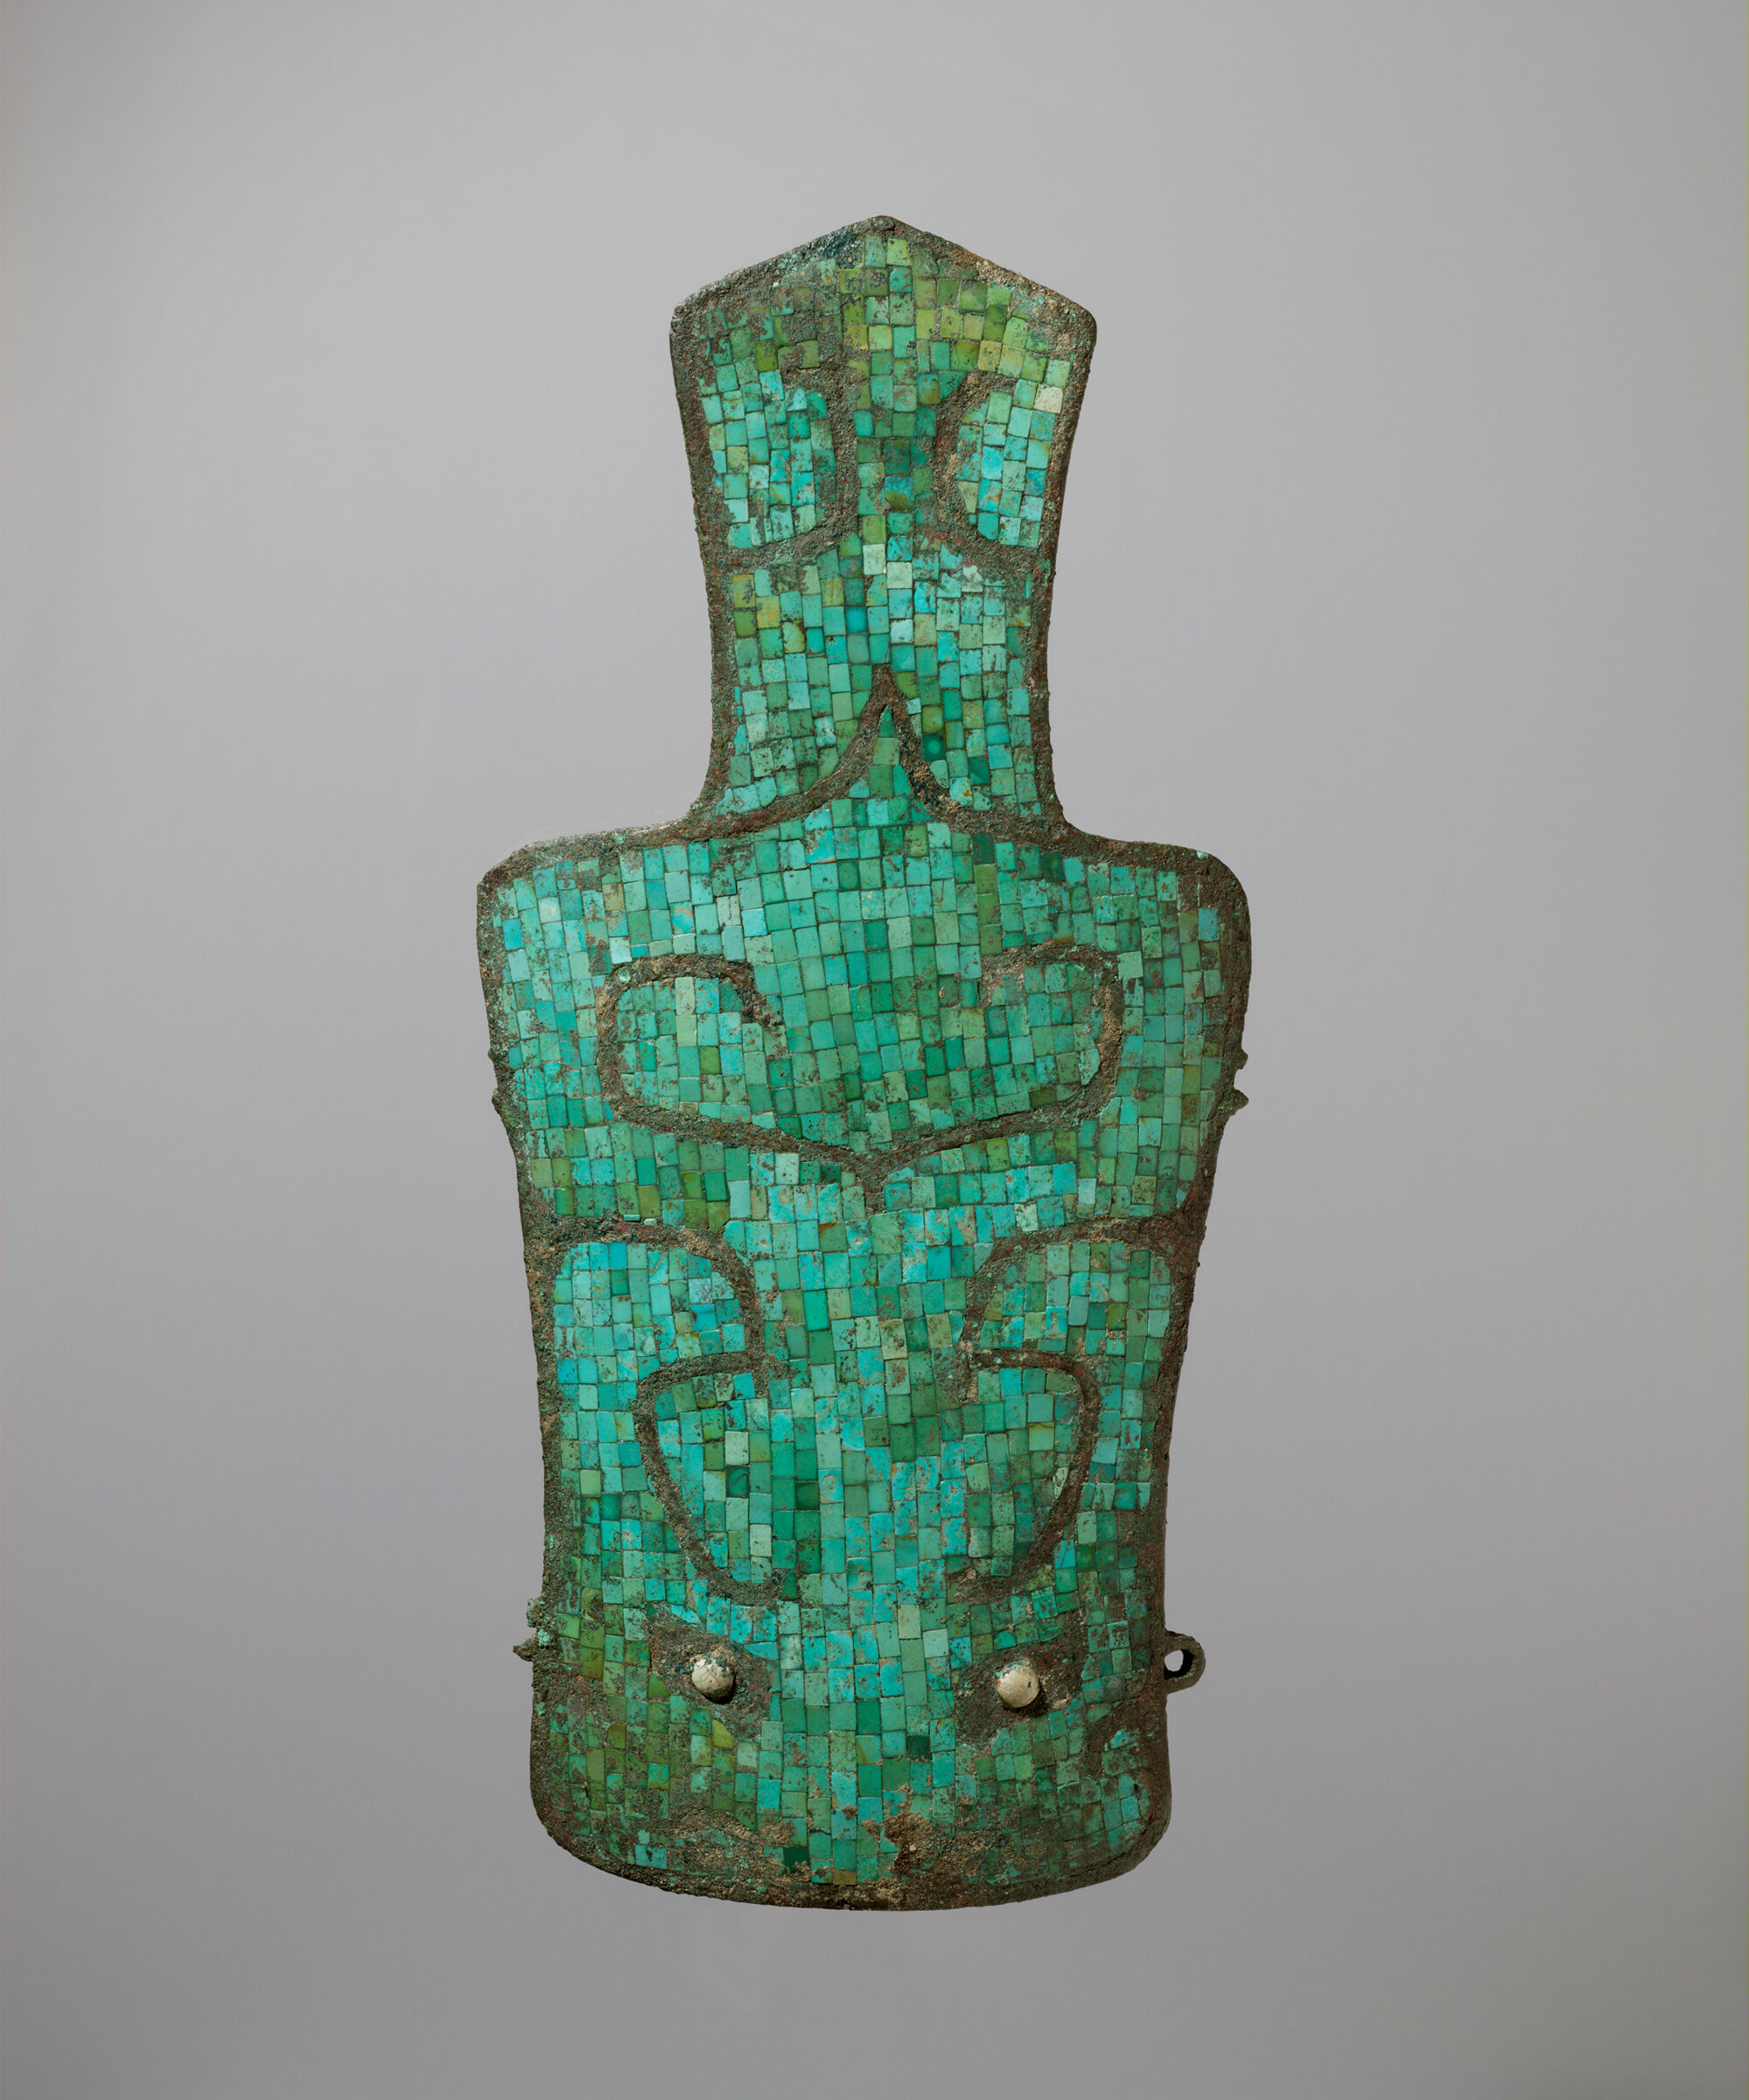 Turquoise-Inlaid Plaque With Stylized Animal-Mask Decoration And Elongated Extension